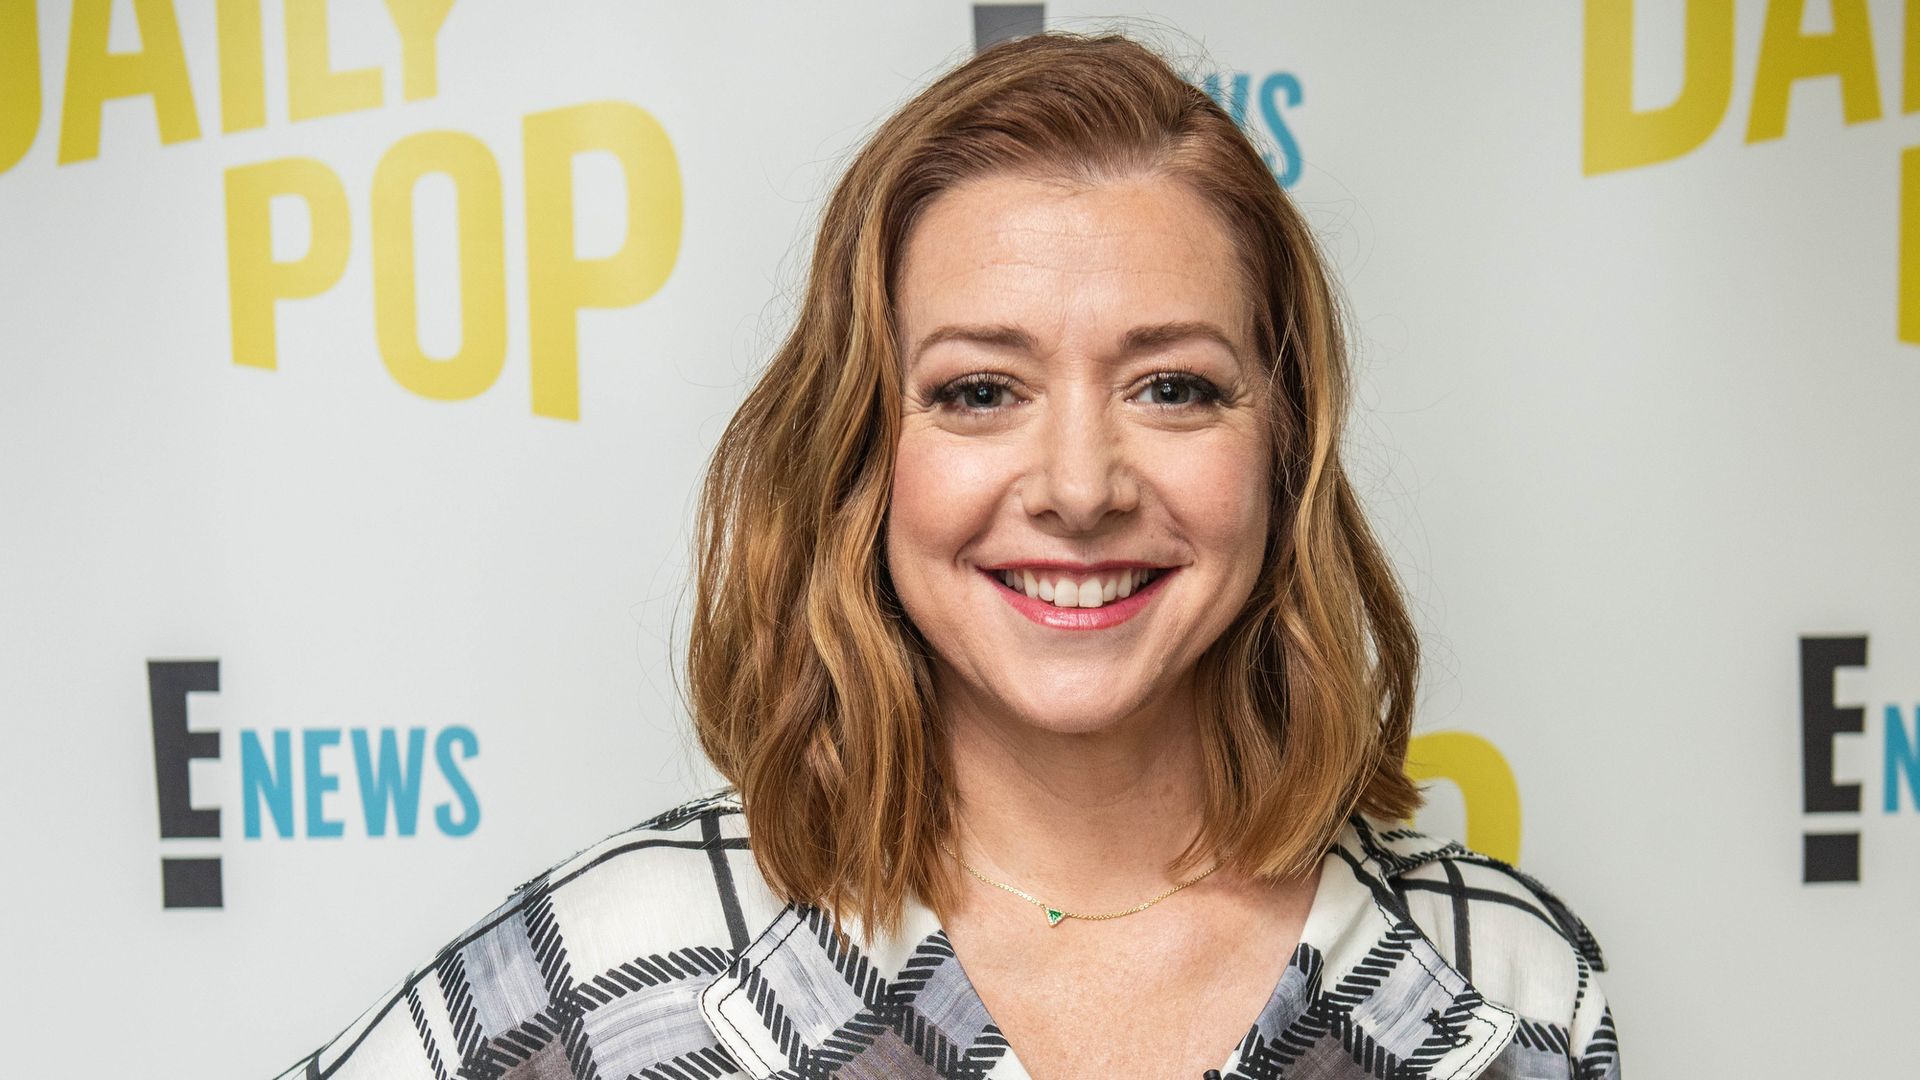 Alyson Hannigan promoting her movie, "Abducted: The Mary Stauffer Story" on Daily Pop